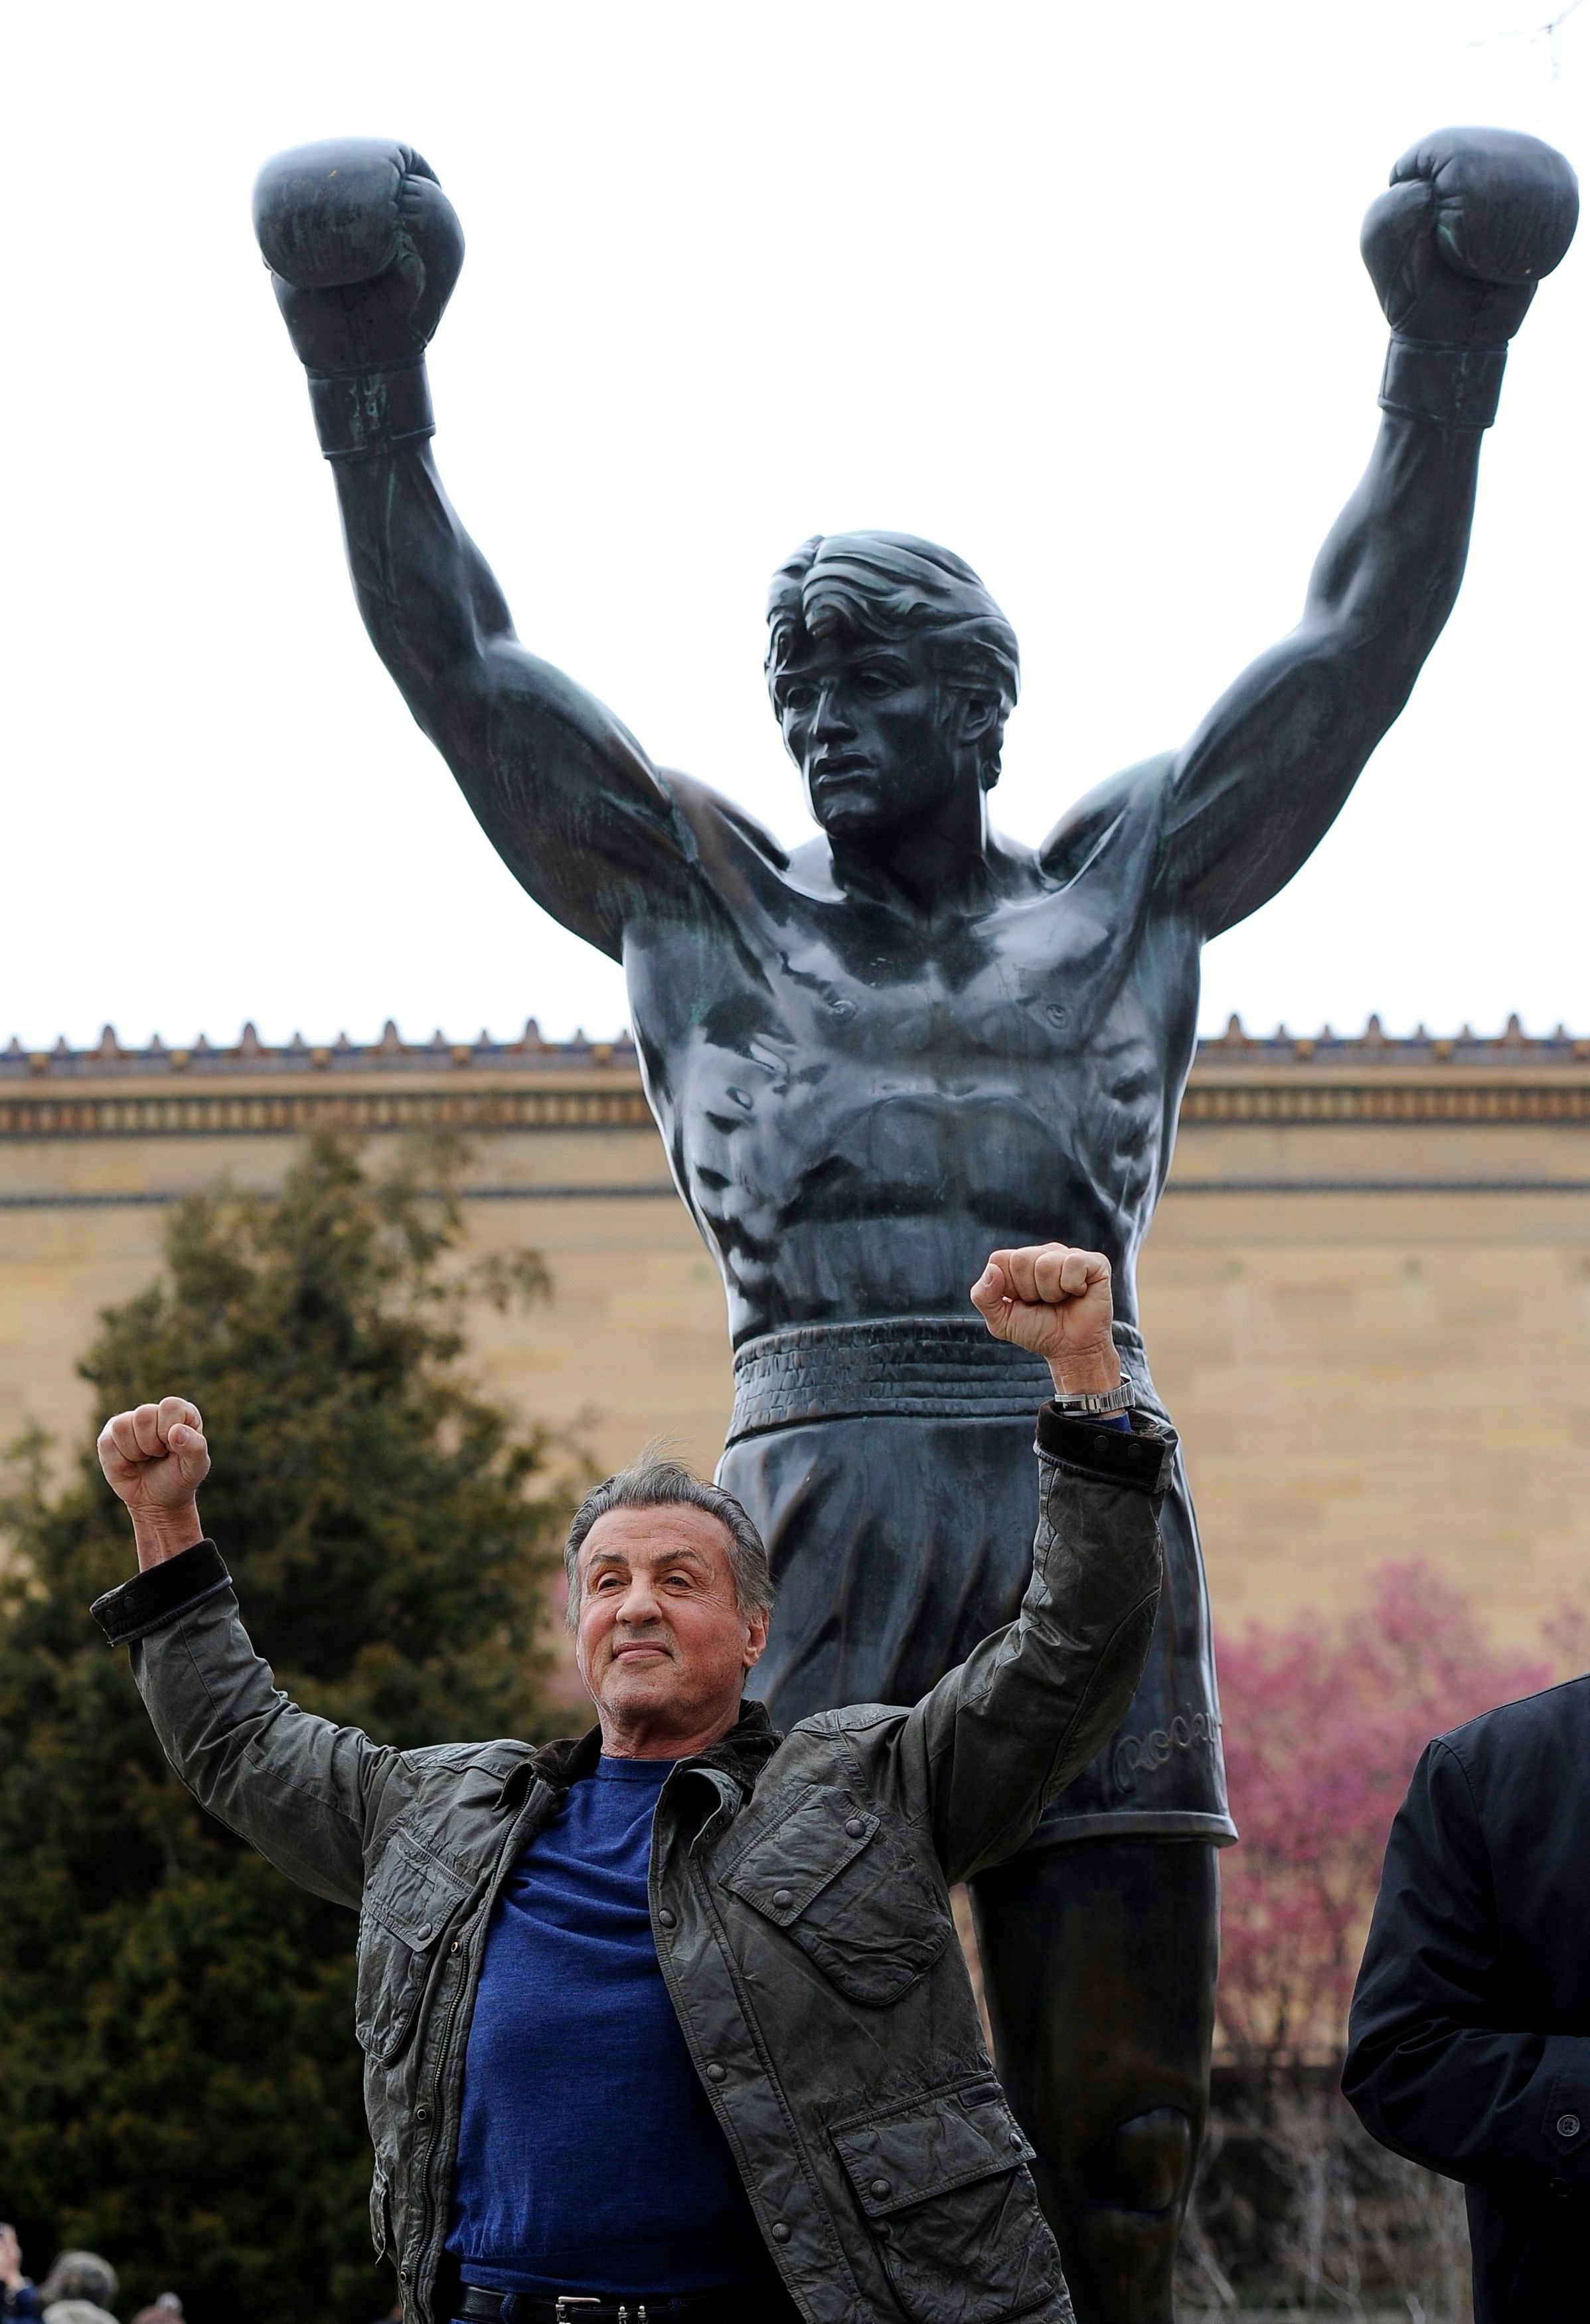 Sylvester Stallone poses in front of the Rocky statue at the Philadelphia Art Museum at a photo op to promote "Creed II" in Philadelphia on Friday, April 6, 2018. The film, part of the "Rocky" film franchise, will be released later this year. (AP Photo/Michael Perez)